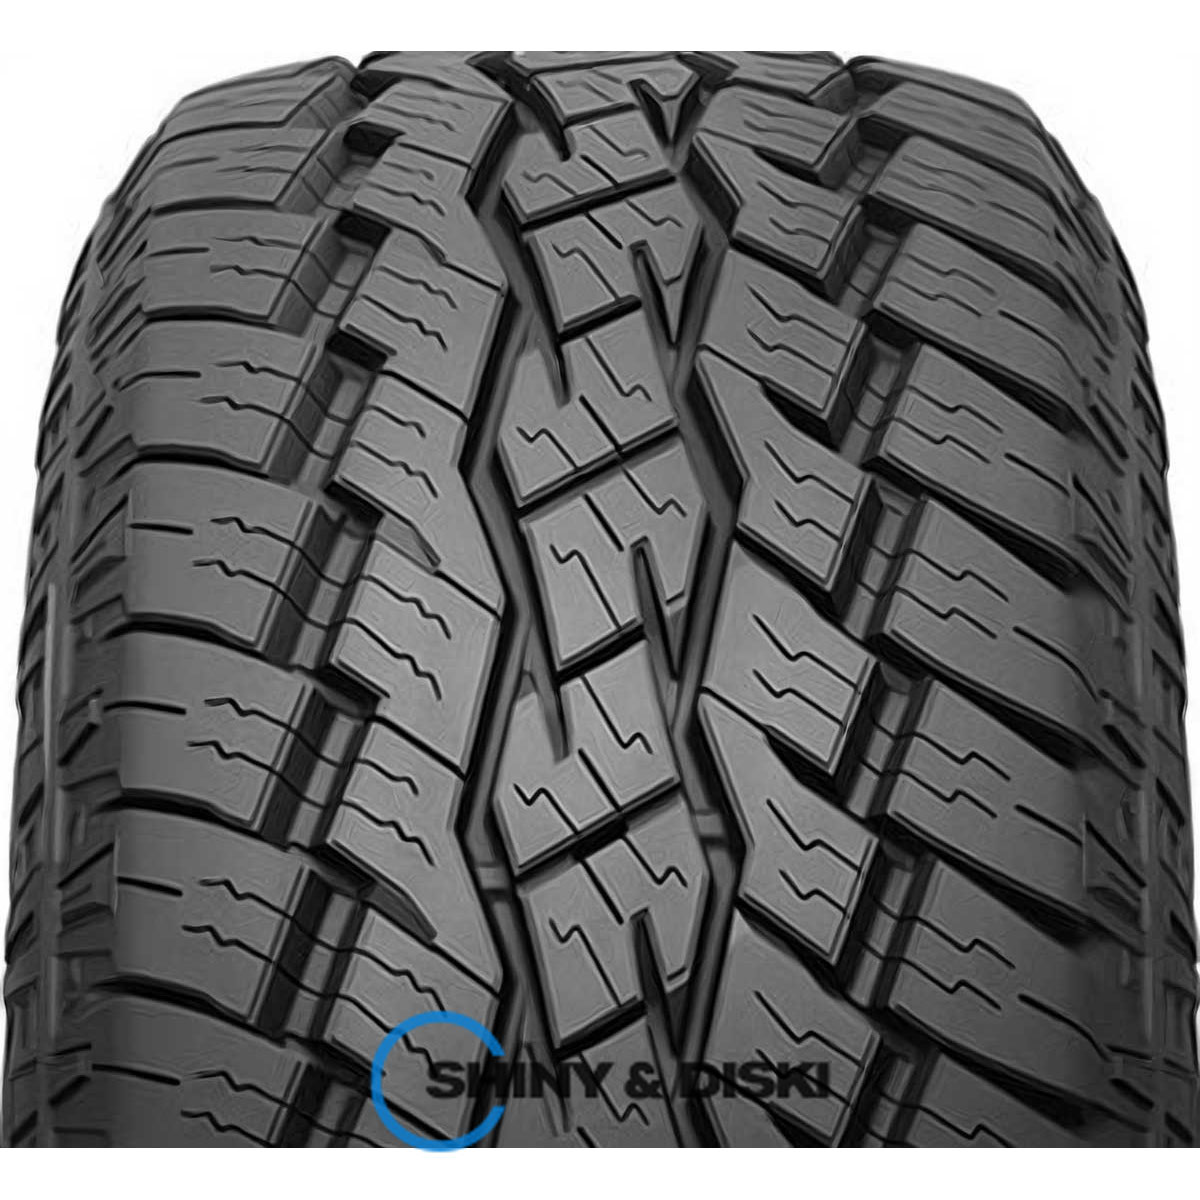 покрышки toyo open country a/t plus 215/85 r16 115s